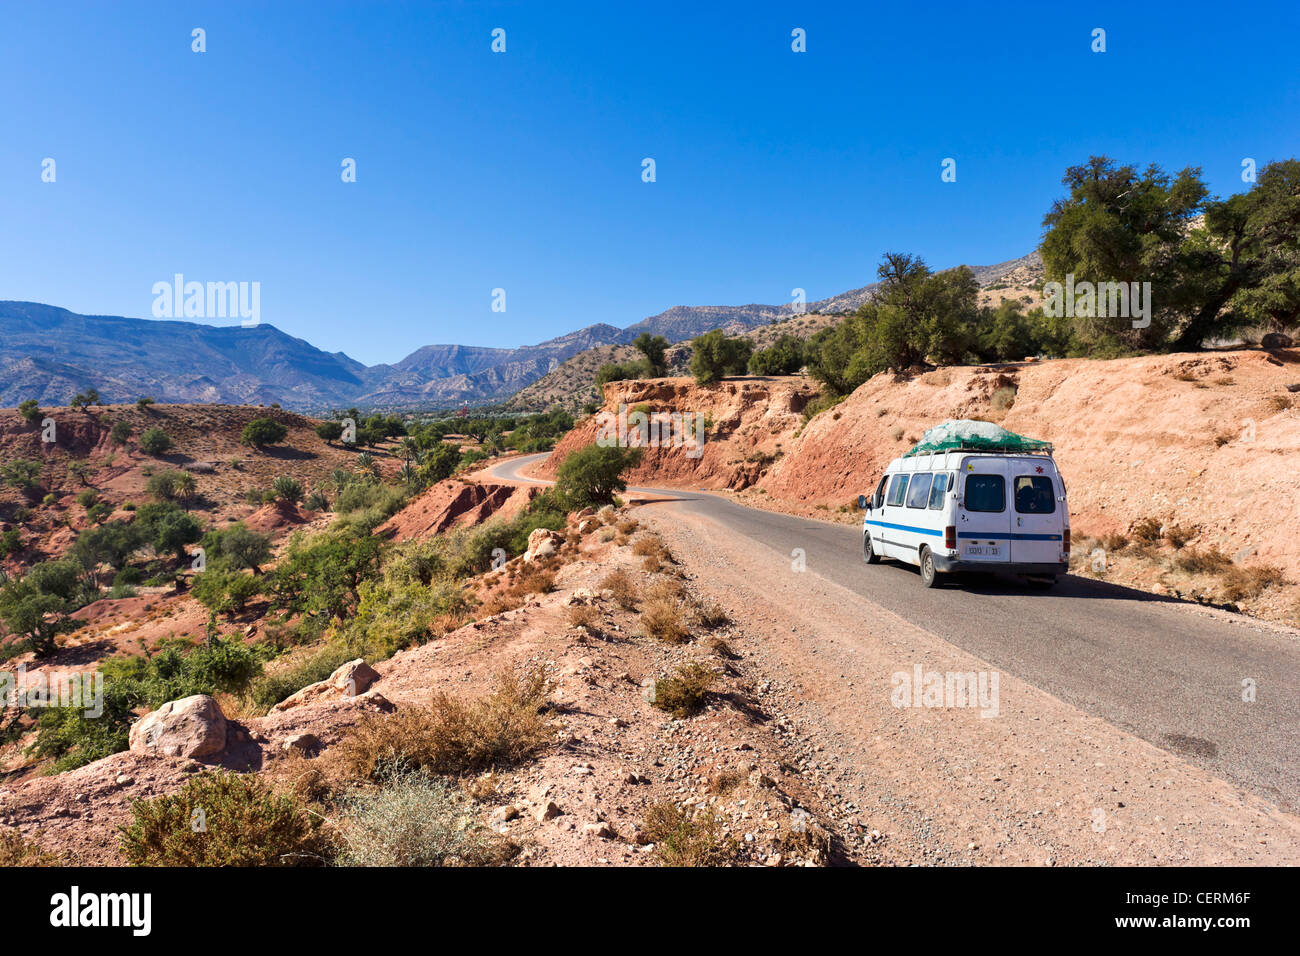 Van carrying passengers on 7002 mountain road between Agadir and Marrakech via Immouzer des Ida Outanane, Morocco, North Africa Stock Photo